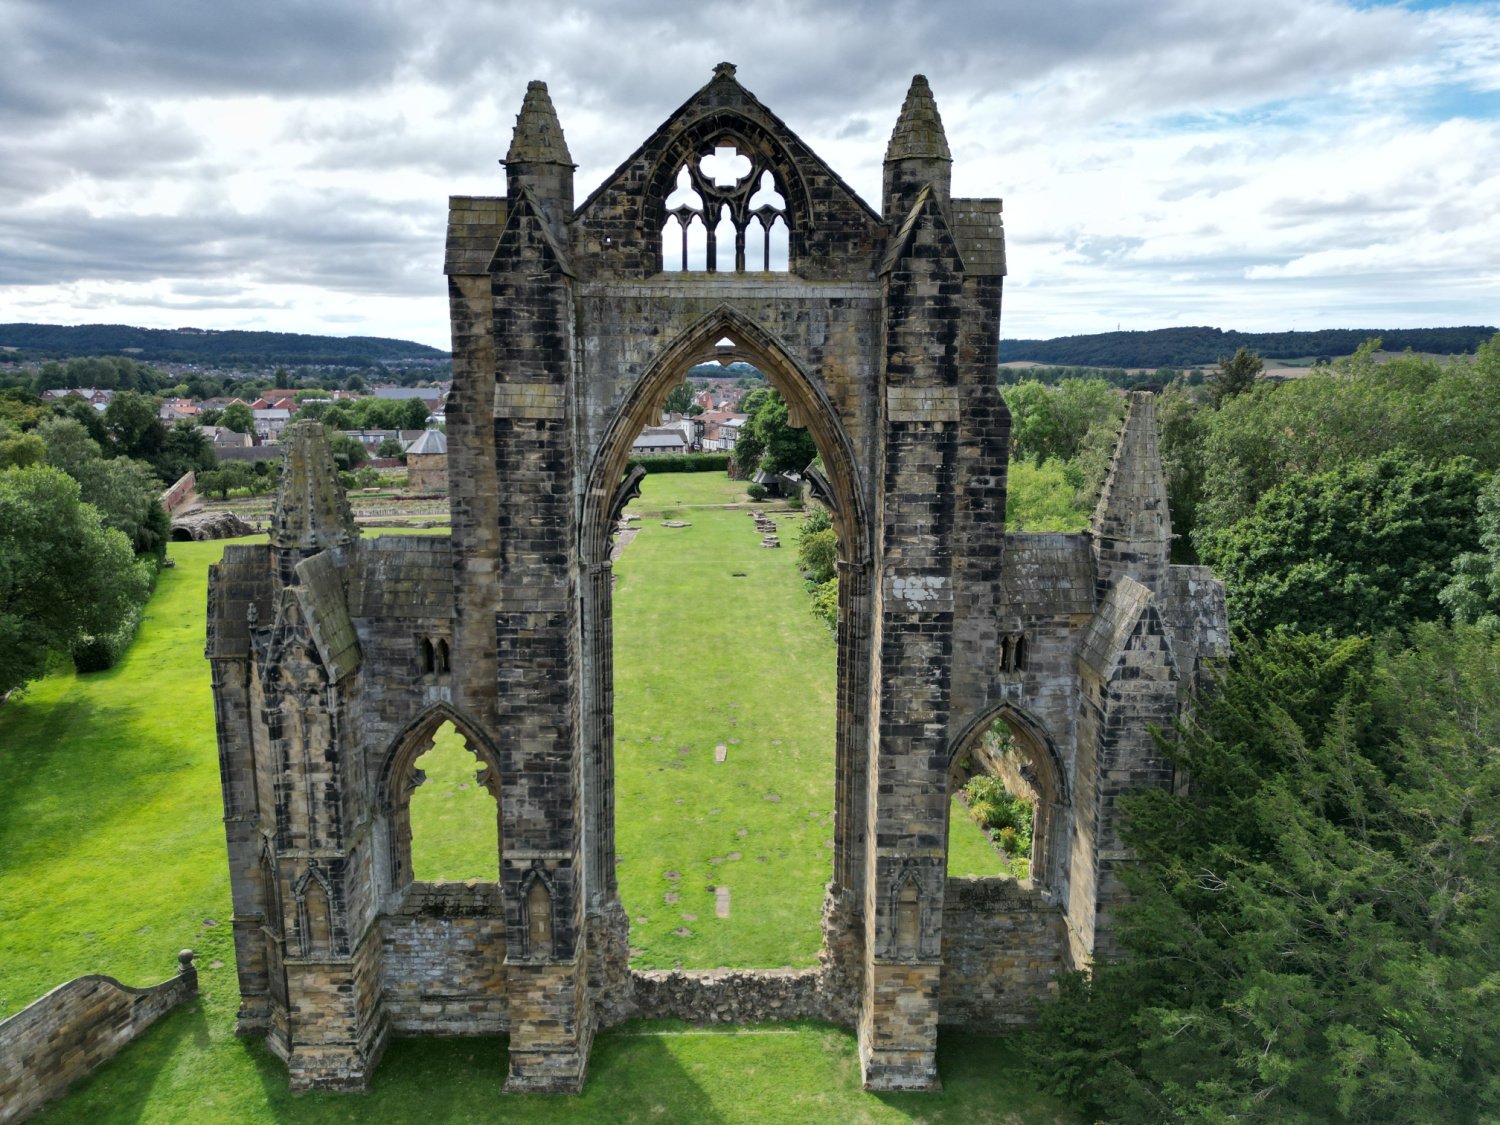 Image name guisborough priory north yorkshire the 20 image from the post A look at the history of Guisborough Priory, with Dr Emma Wells in Yorkshire.com.